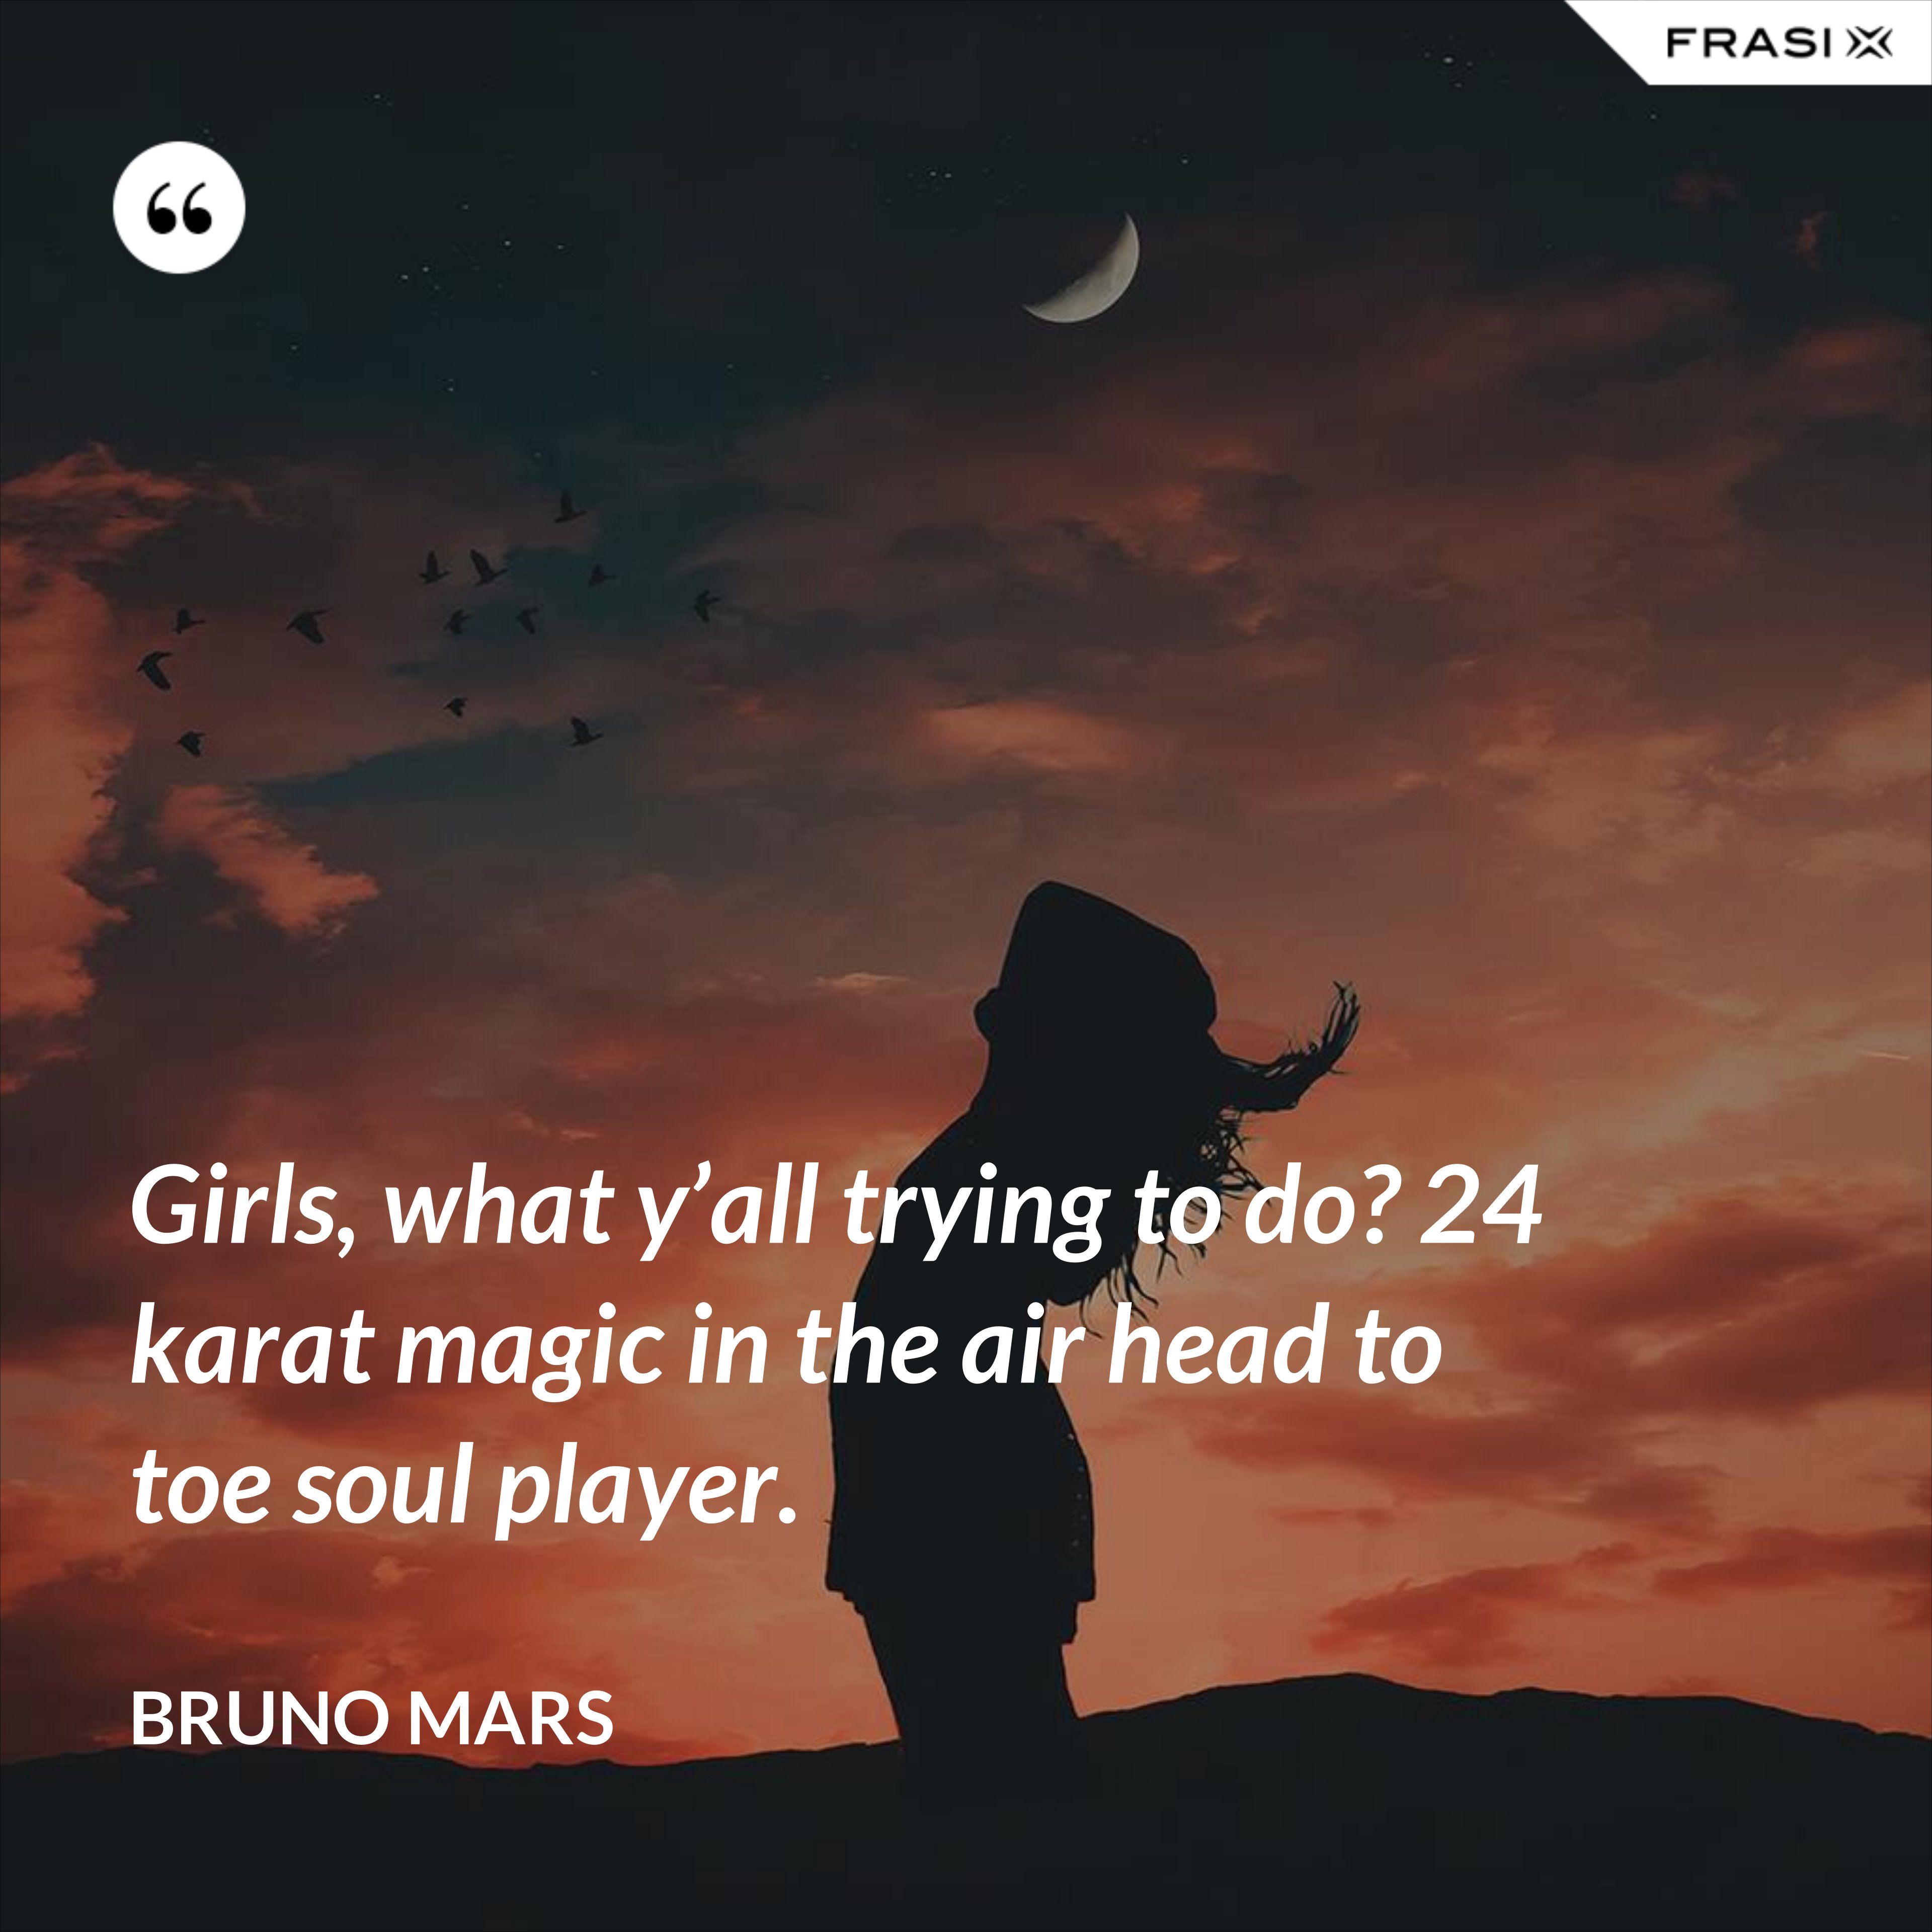 Girls, what y’all trying to do? 24 karat magic in the air head to toe soul player. - Bruno Mars